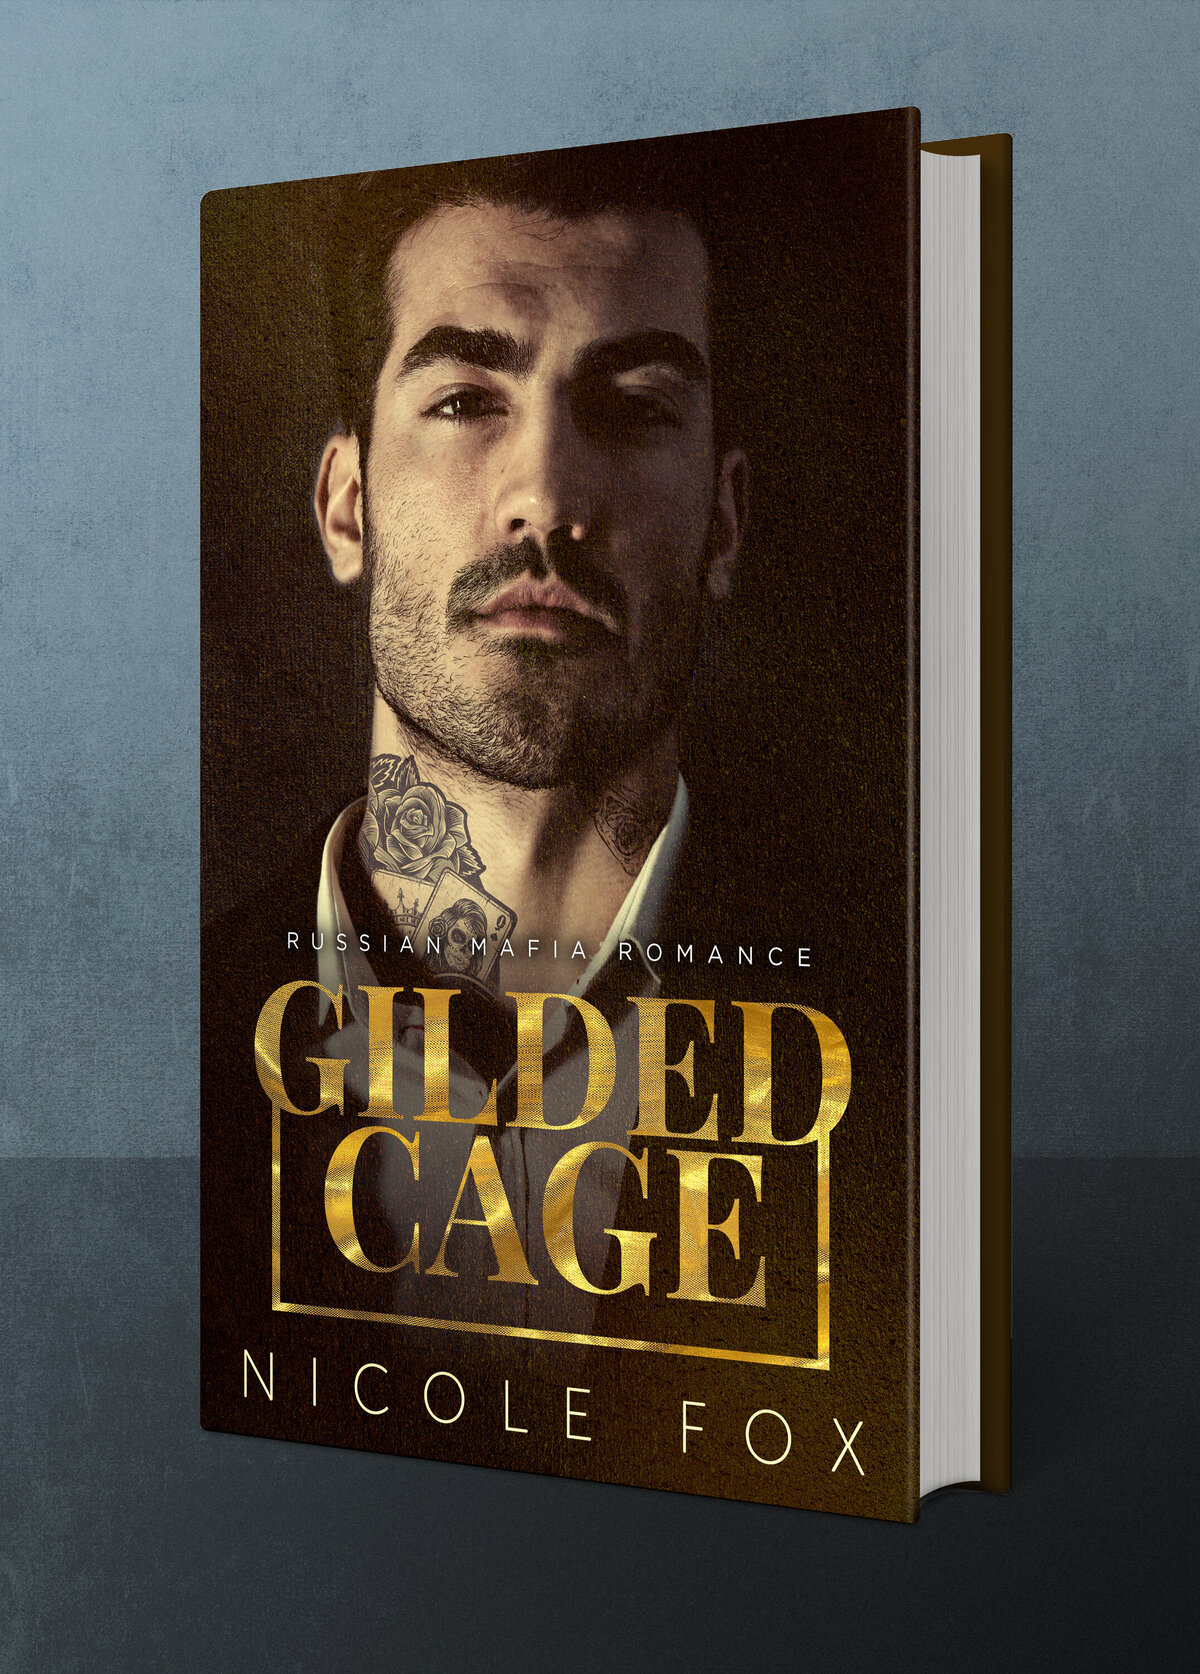 Gilded Cage by Nicole Fox